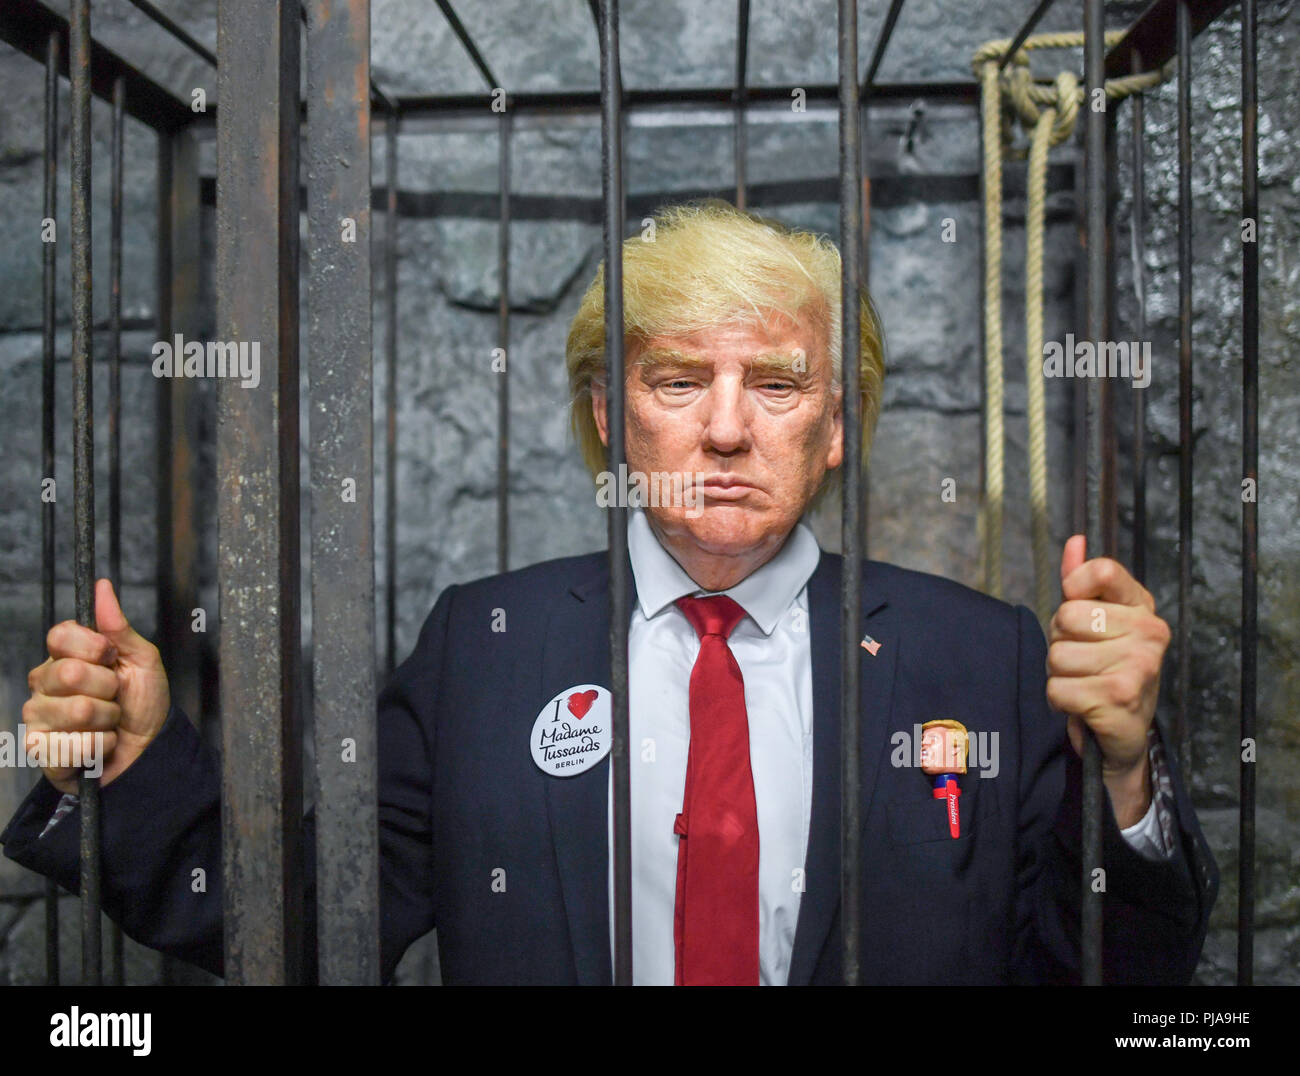 berlin-germany-05th-sep-2018-an-actor-of-the-wax-figure-cabinet-madame-tussauds-with-a-silicone-mask-of-us-president-donald-trump-stands-behind-the-bars-of-a-cage-in-a-torture-cellar-during-a-press-conference-in-the-berlin-dungeon-the-live-figure-can-currently-be-seen-with-live-performances-at-madame-tussauds-in-the-dungeons-the-dark-past-of-the-city-of-berlin-is-brought-up-for-discussion-credit-jens-kalaenedpa-zentralbildzbdpaalamy-live-news-PJA9HE.jpg